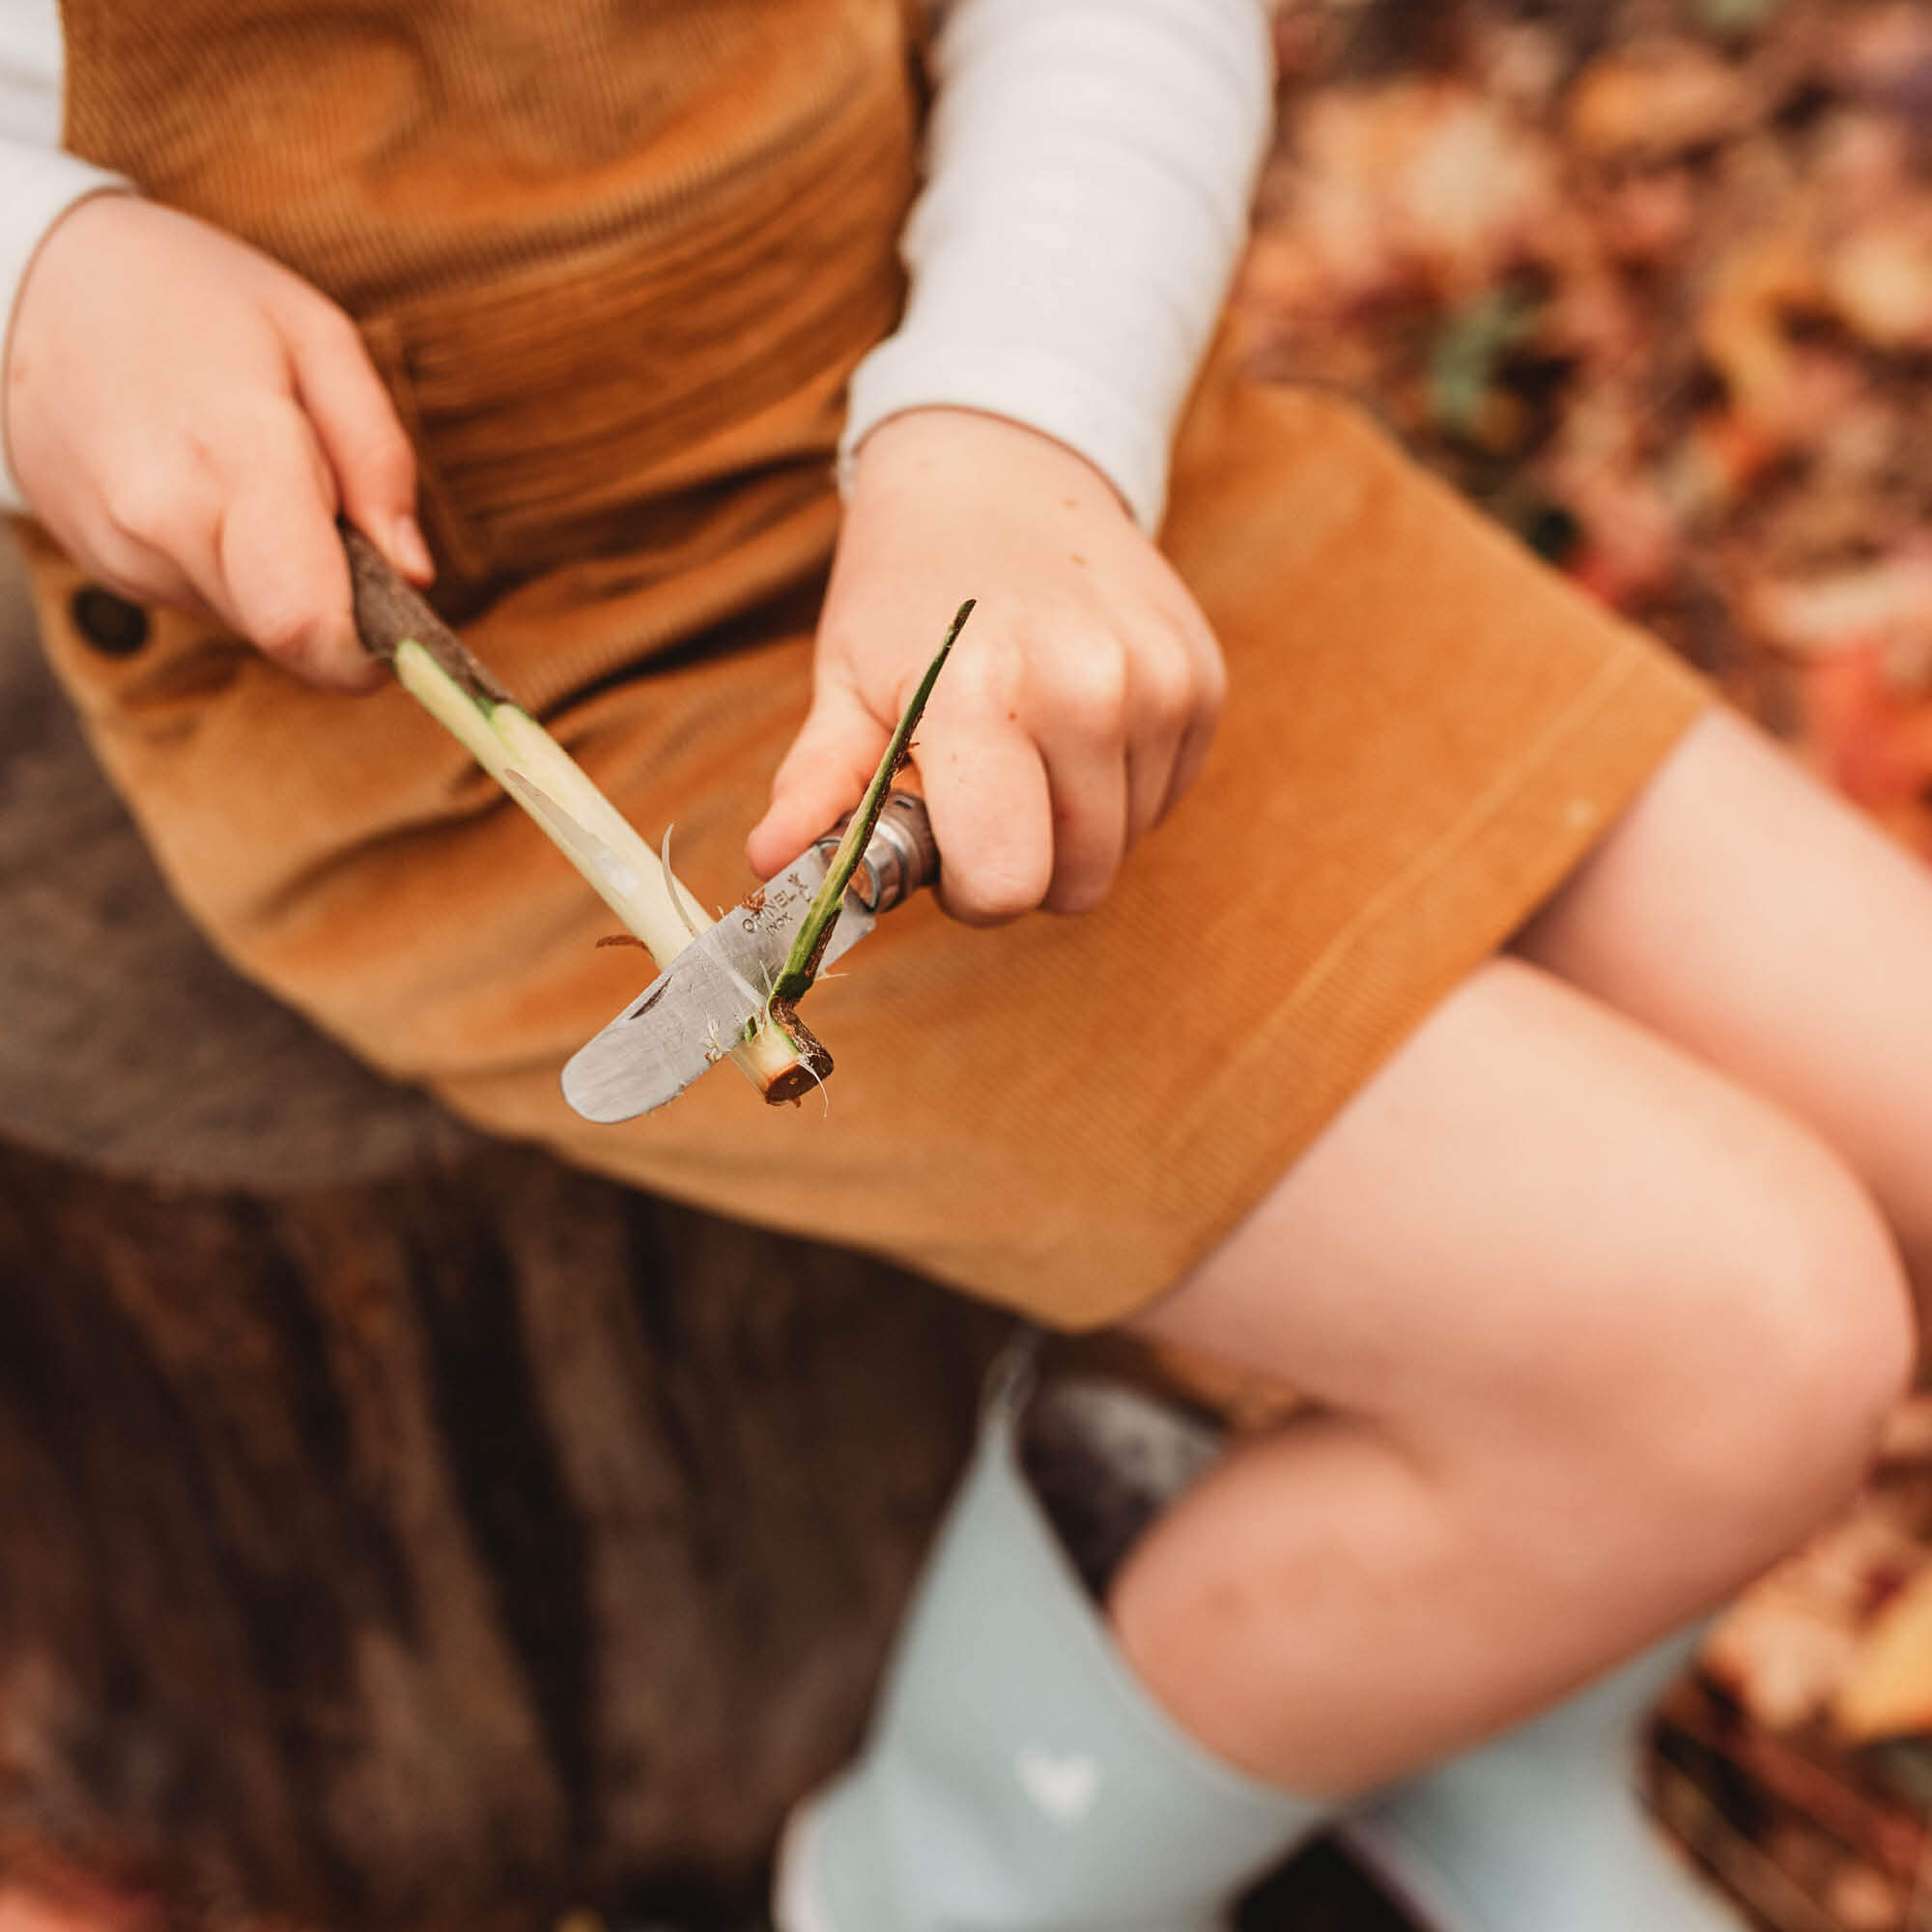 Child sitting in woods peeling bark from a stick. Wood whittling knives for kids for all your nature craft projects, suitable for beginners and advanced woodworkers. Made by Opinel from Your Wild Books.